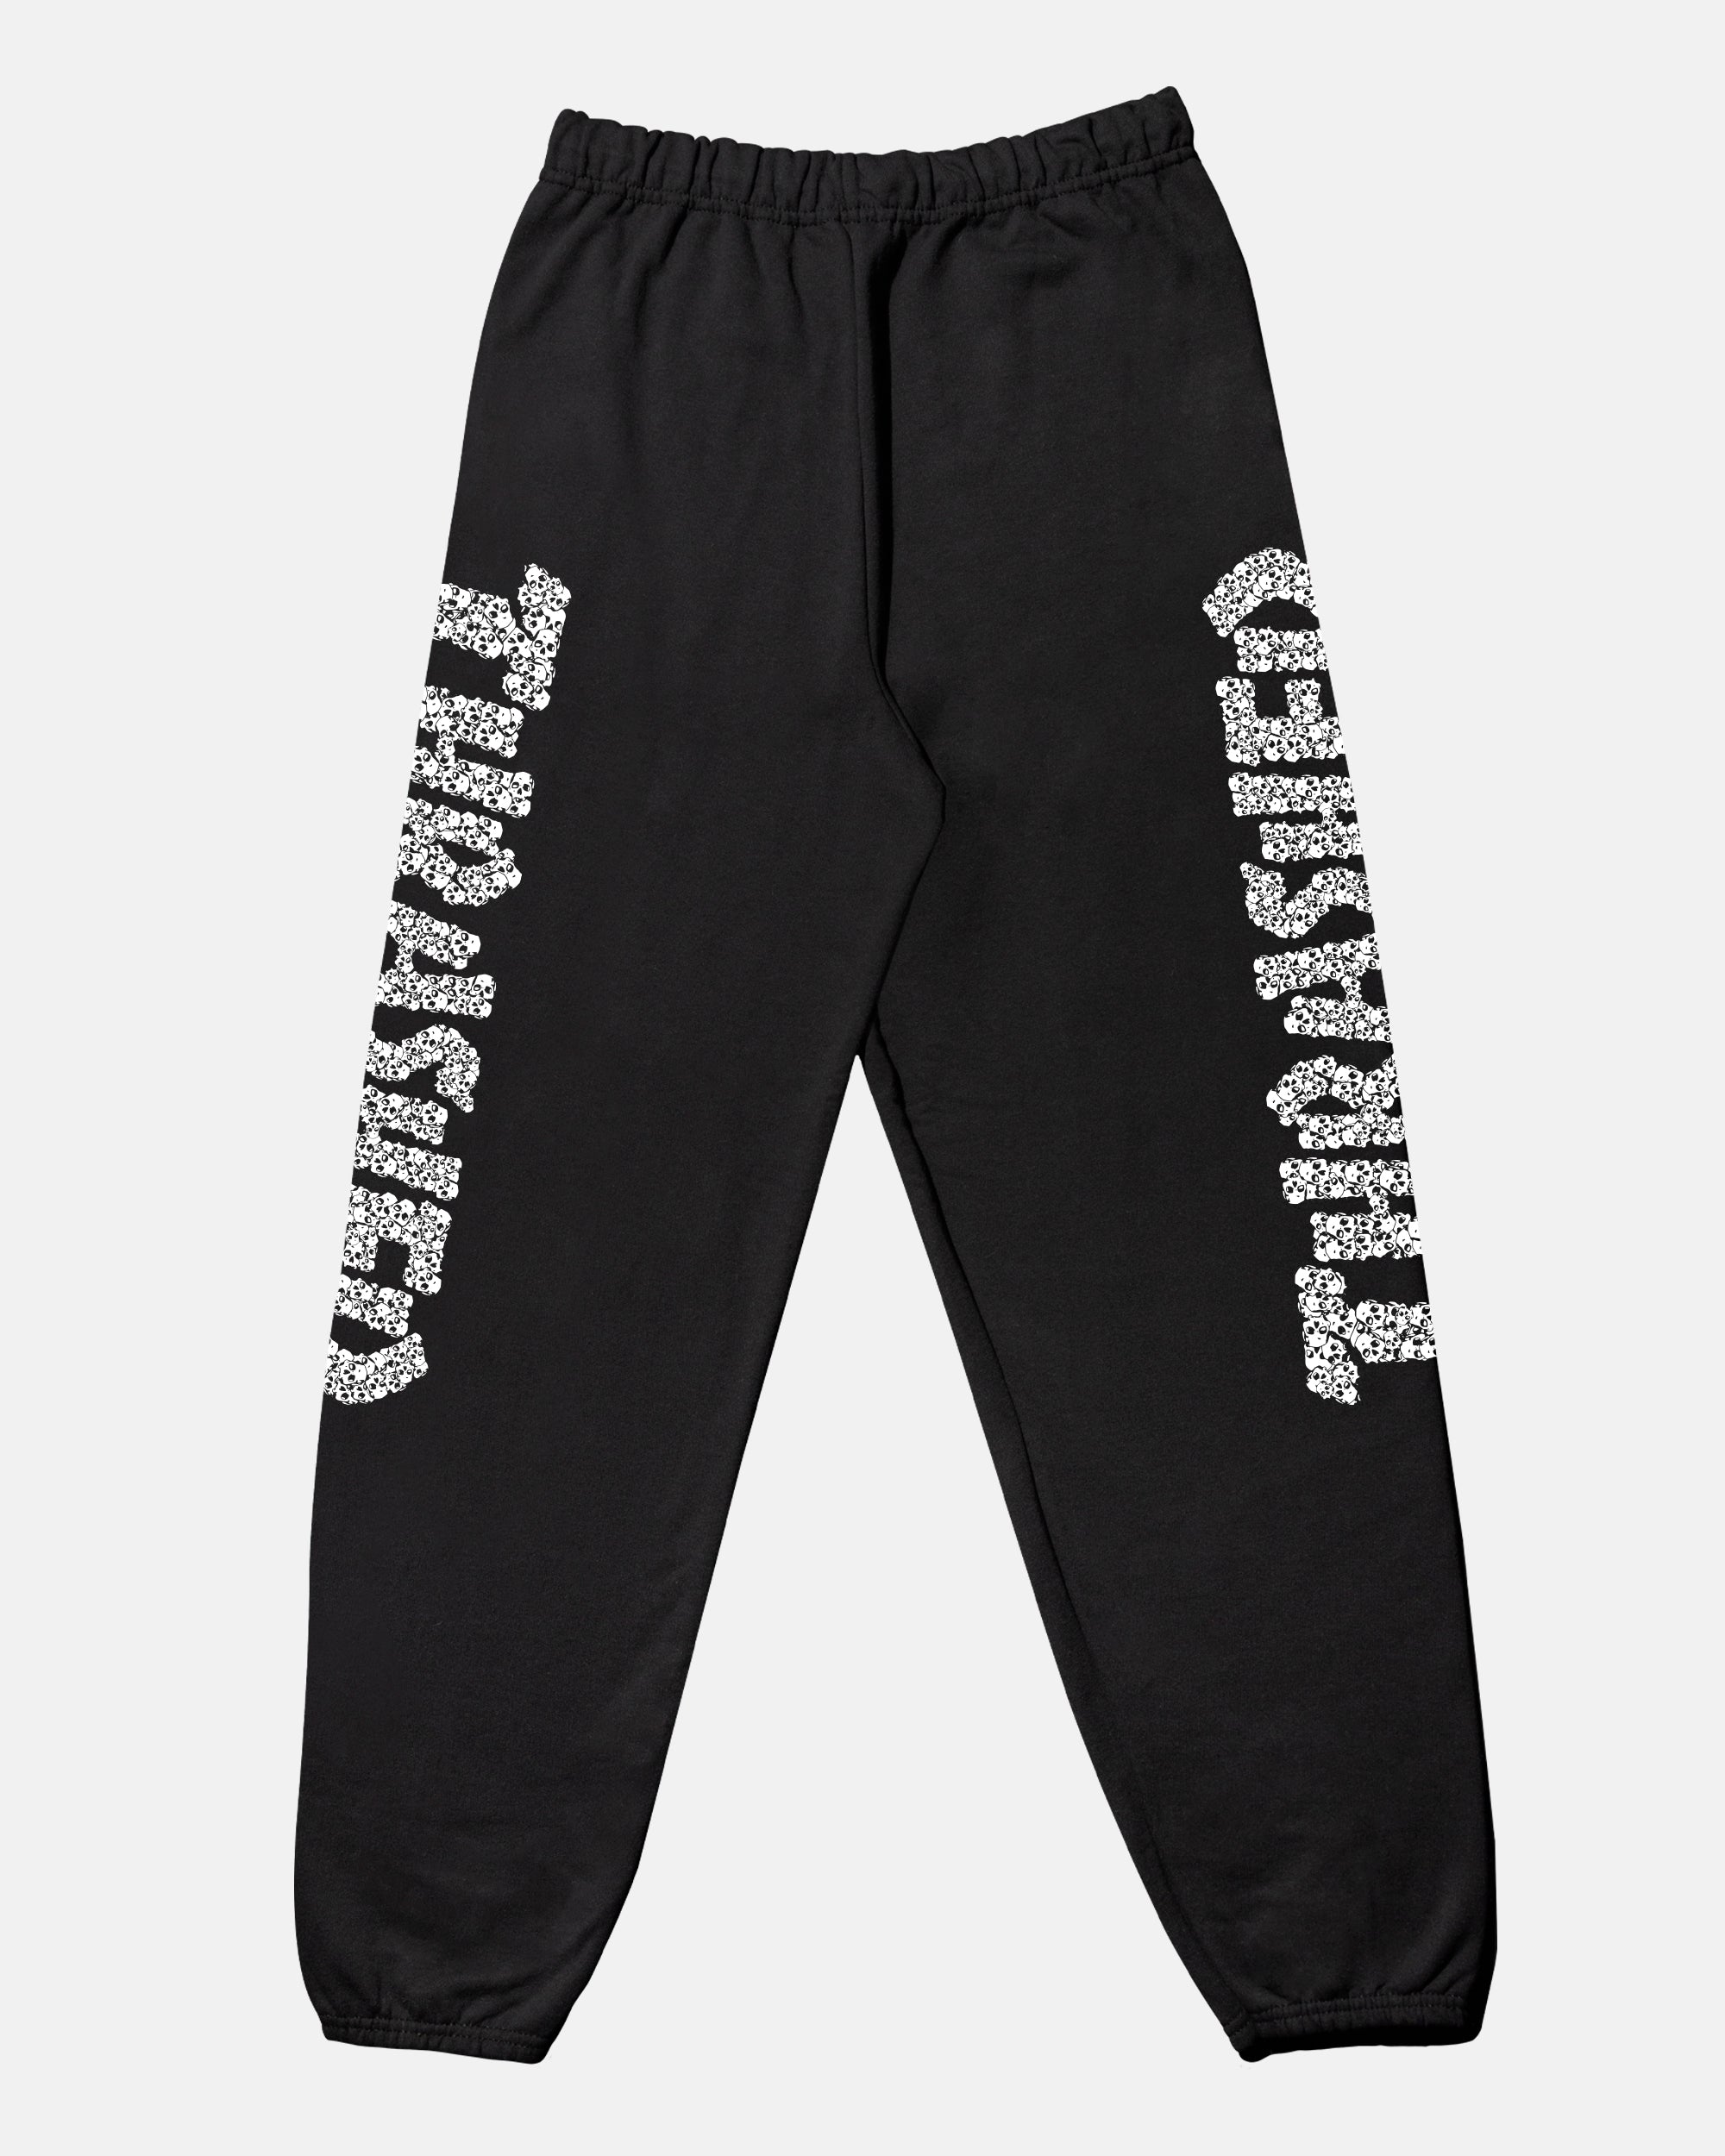 Is That The New Grunge Punk Skull Graphic Sweatpants ??